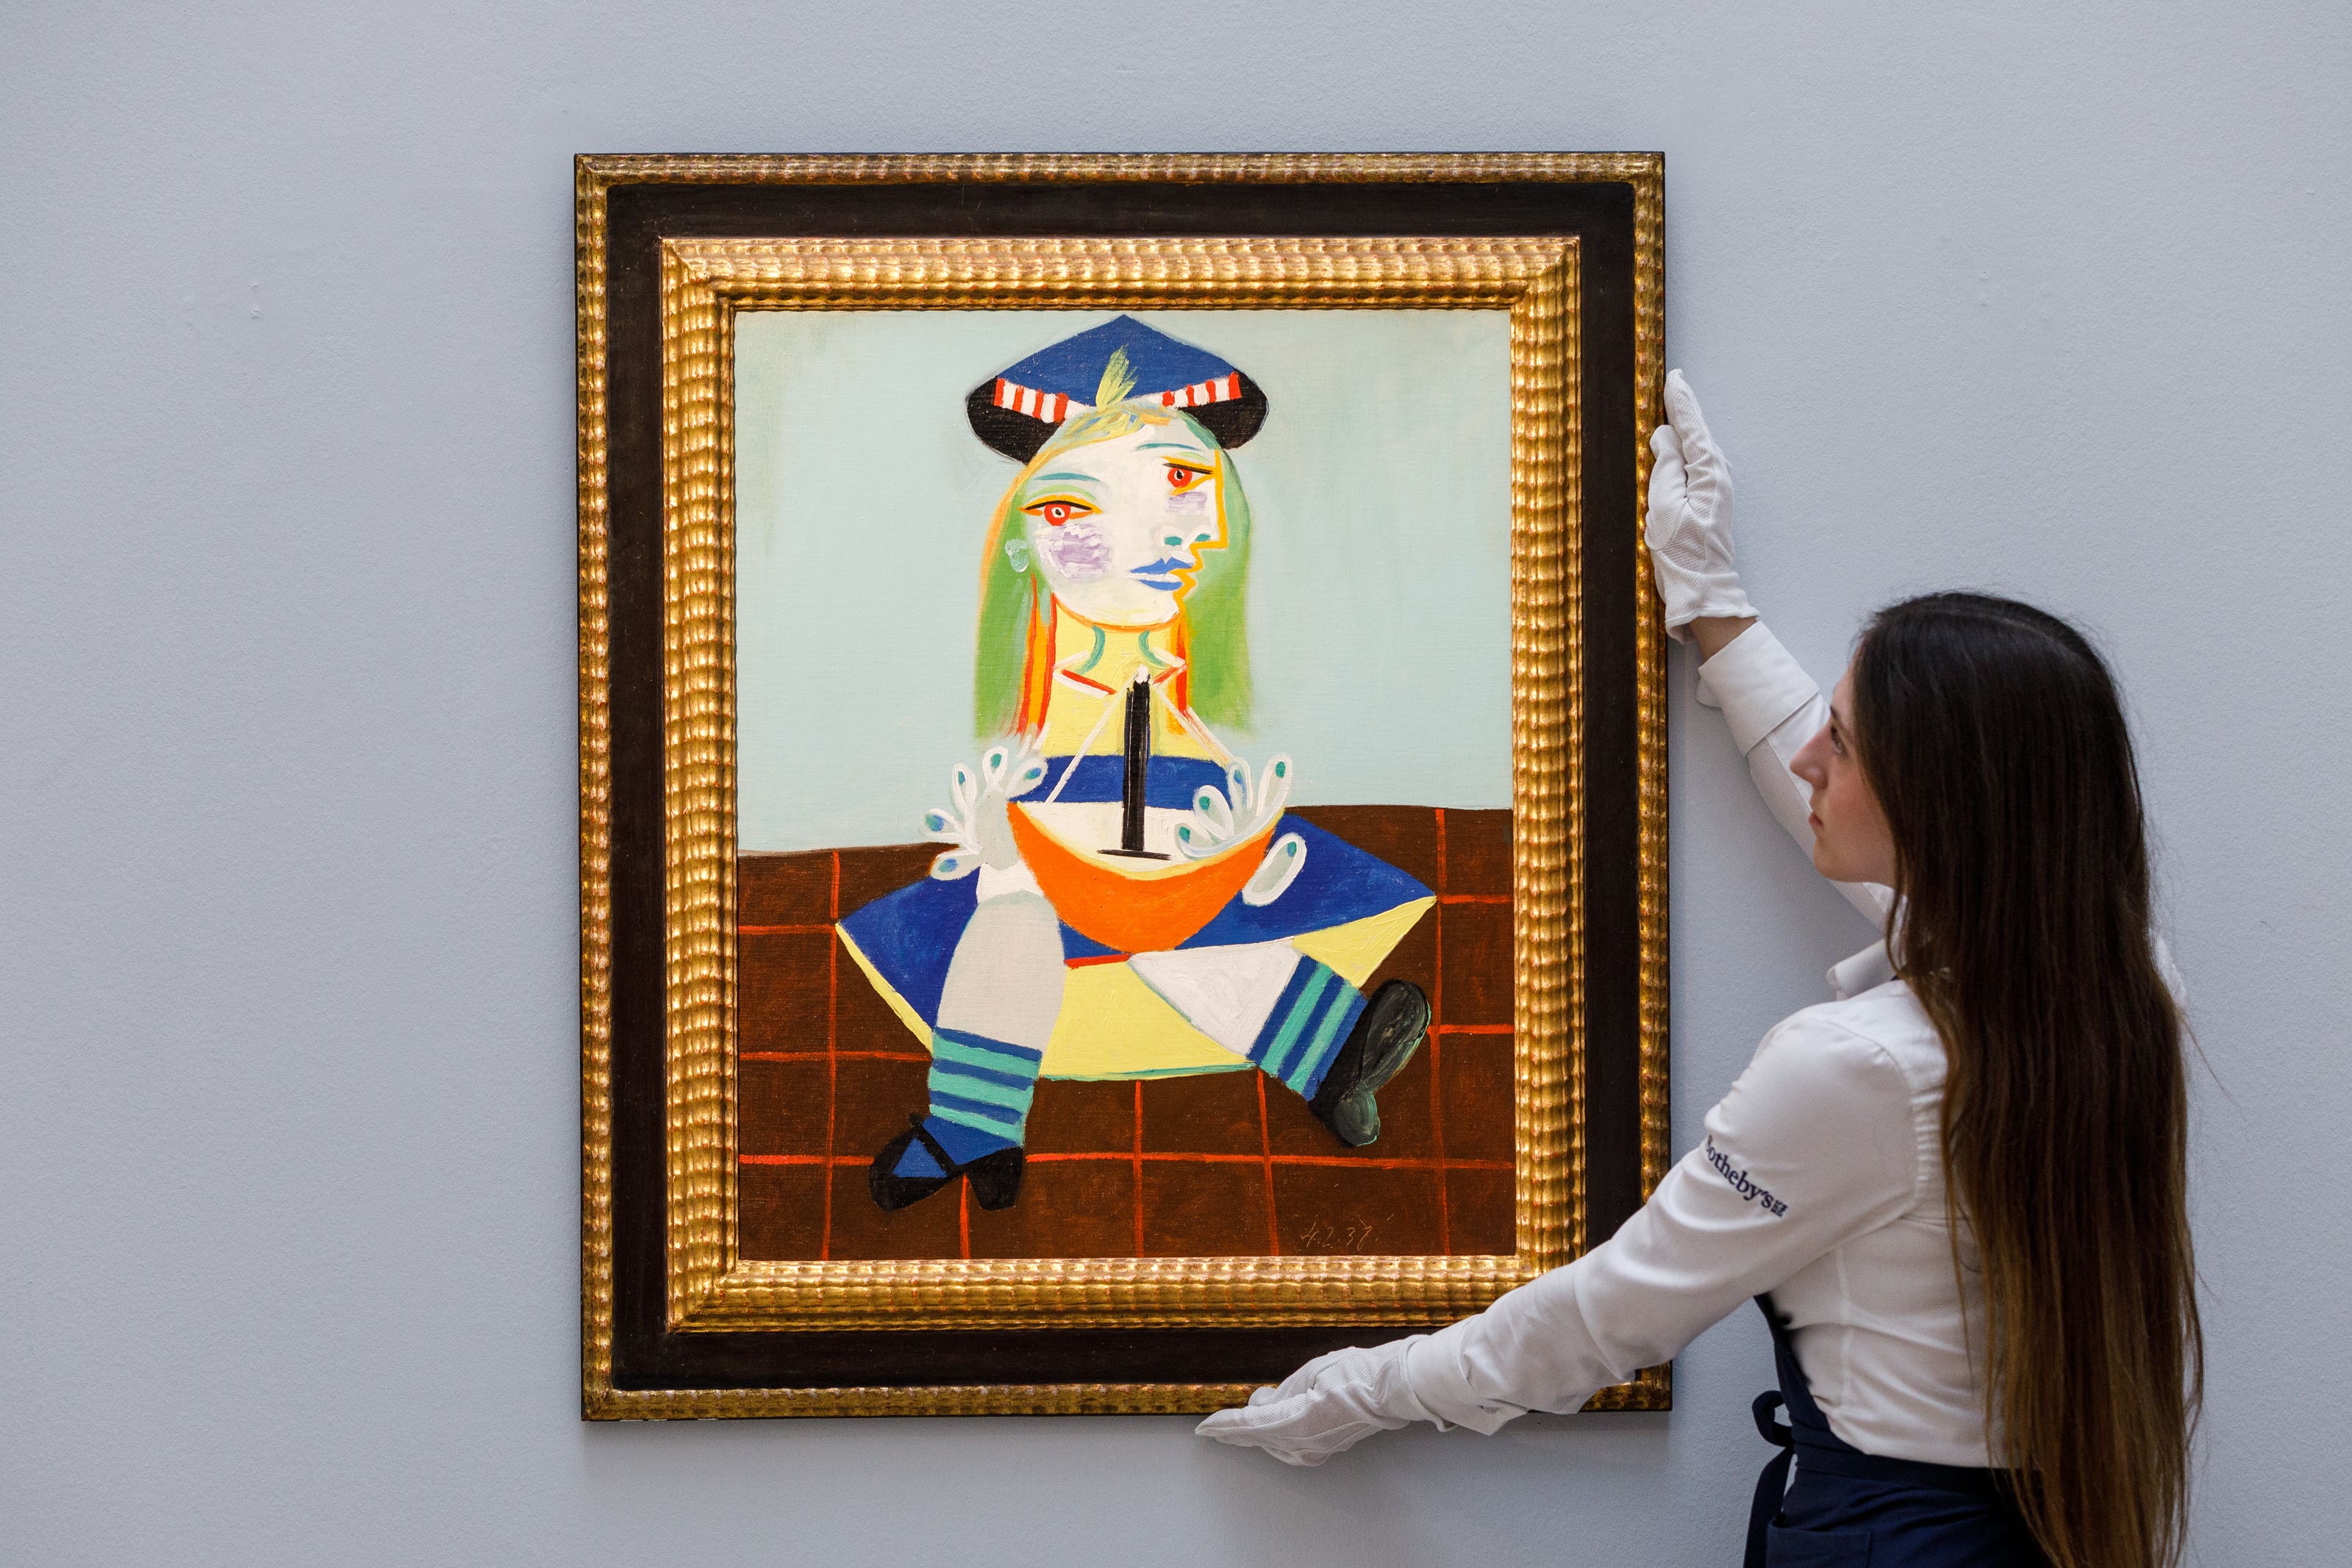 A portrait by Pablo Picasso of his daughter Maya has sold for more than £18 million at auction